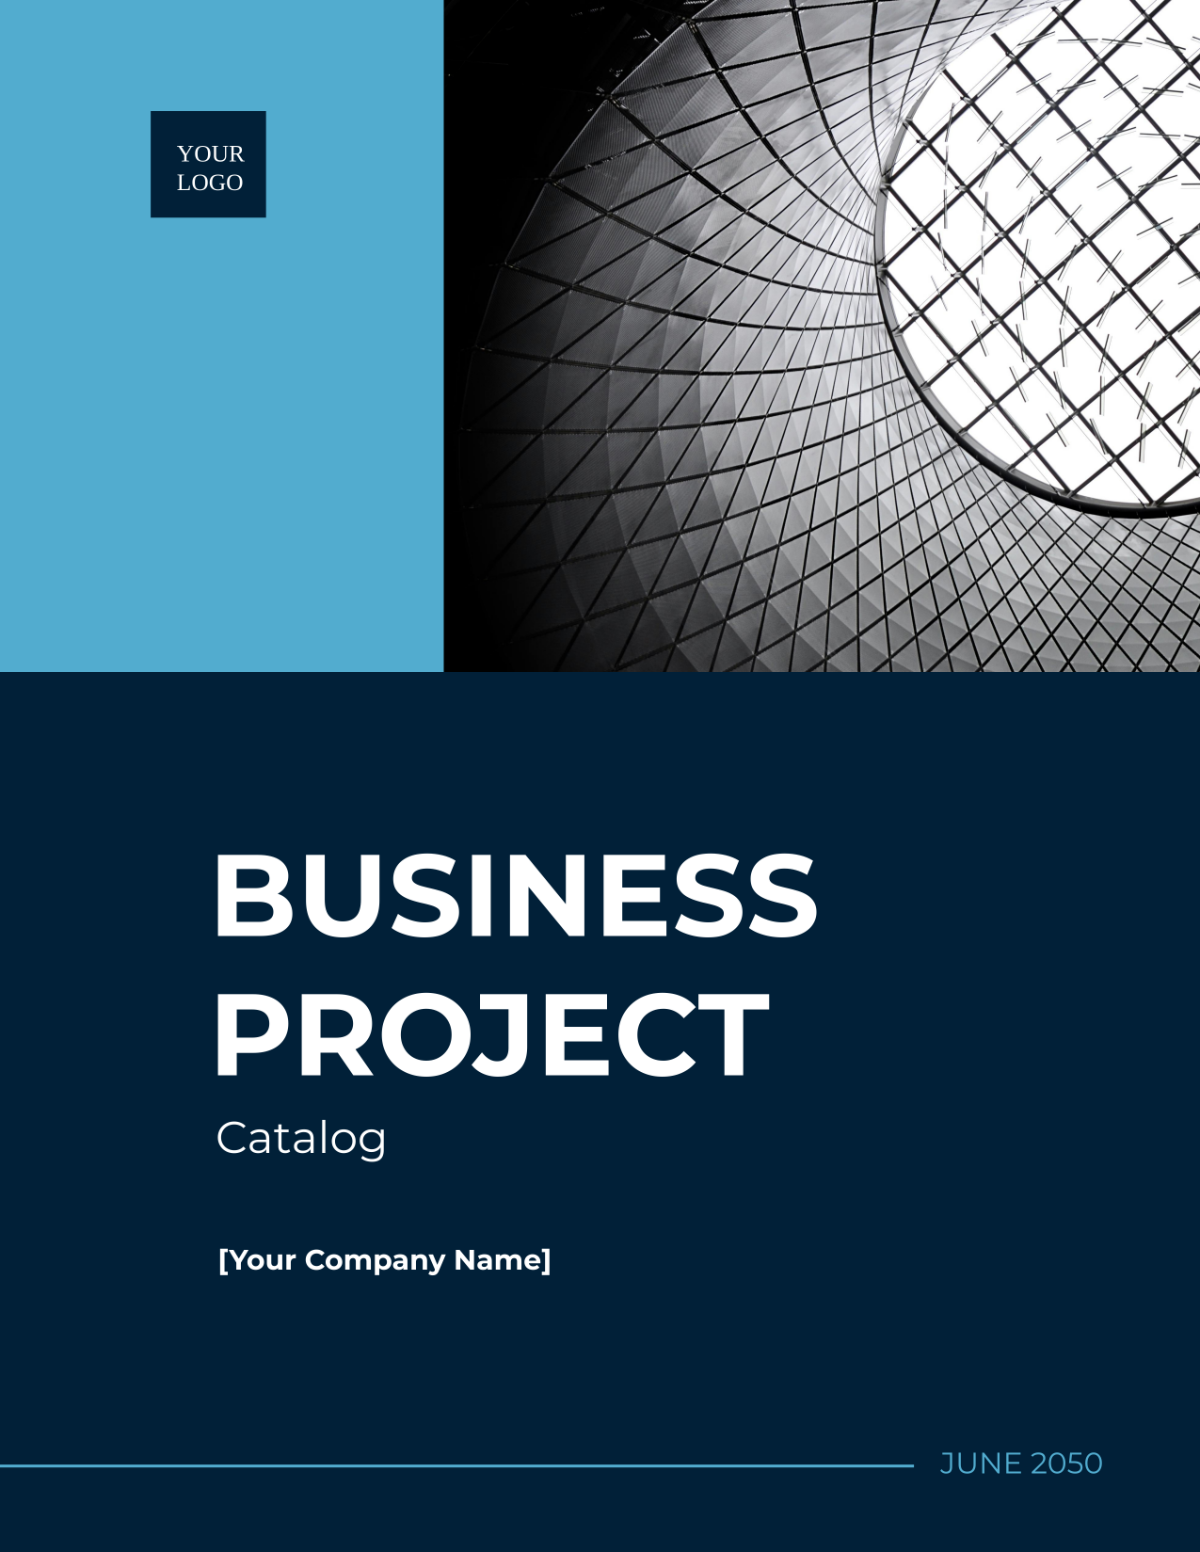 Business Project Catalog